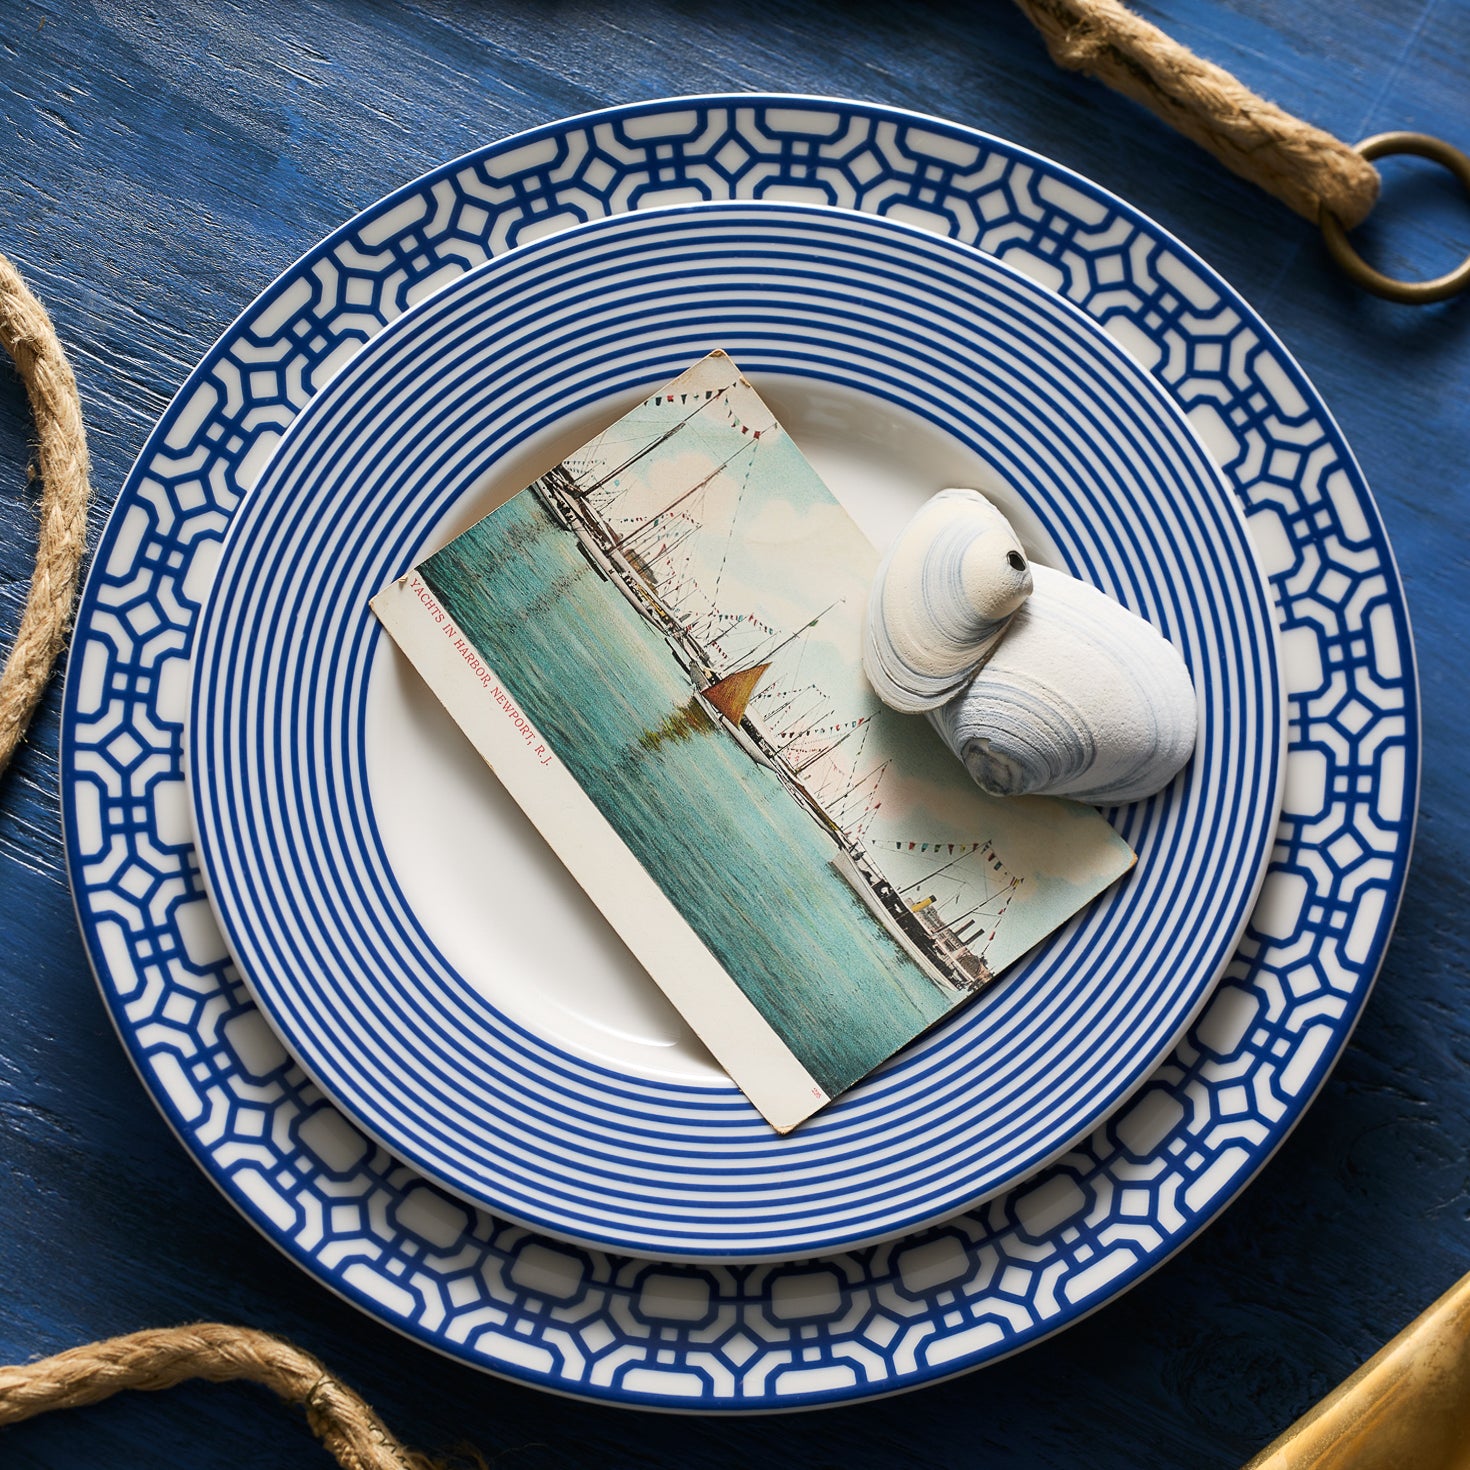 Newport Stripe Rimmed Salad Plate crafted from high-fired porcelain featuring a Newport Stripe design with blue concentric circles around the rim by Caskata Artisanal Home.